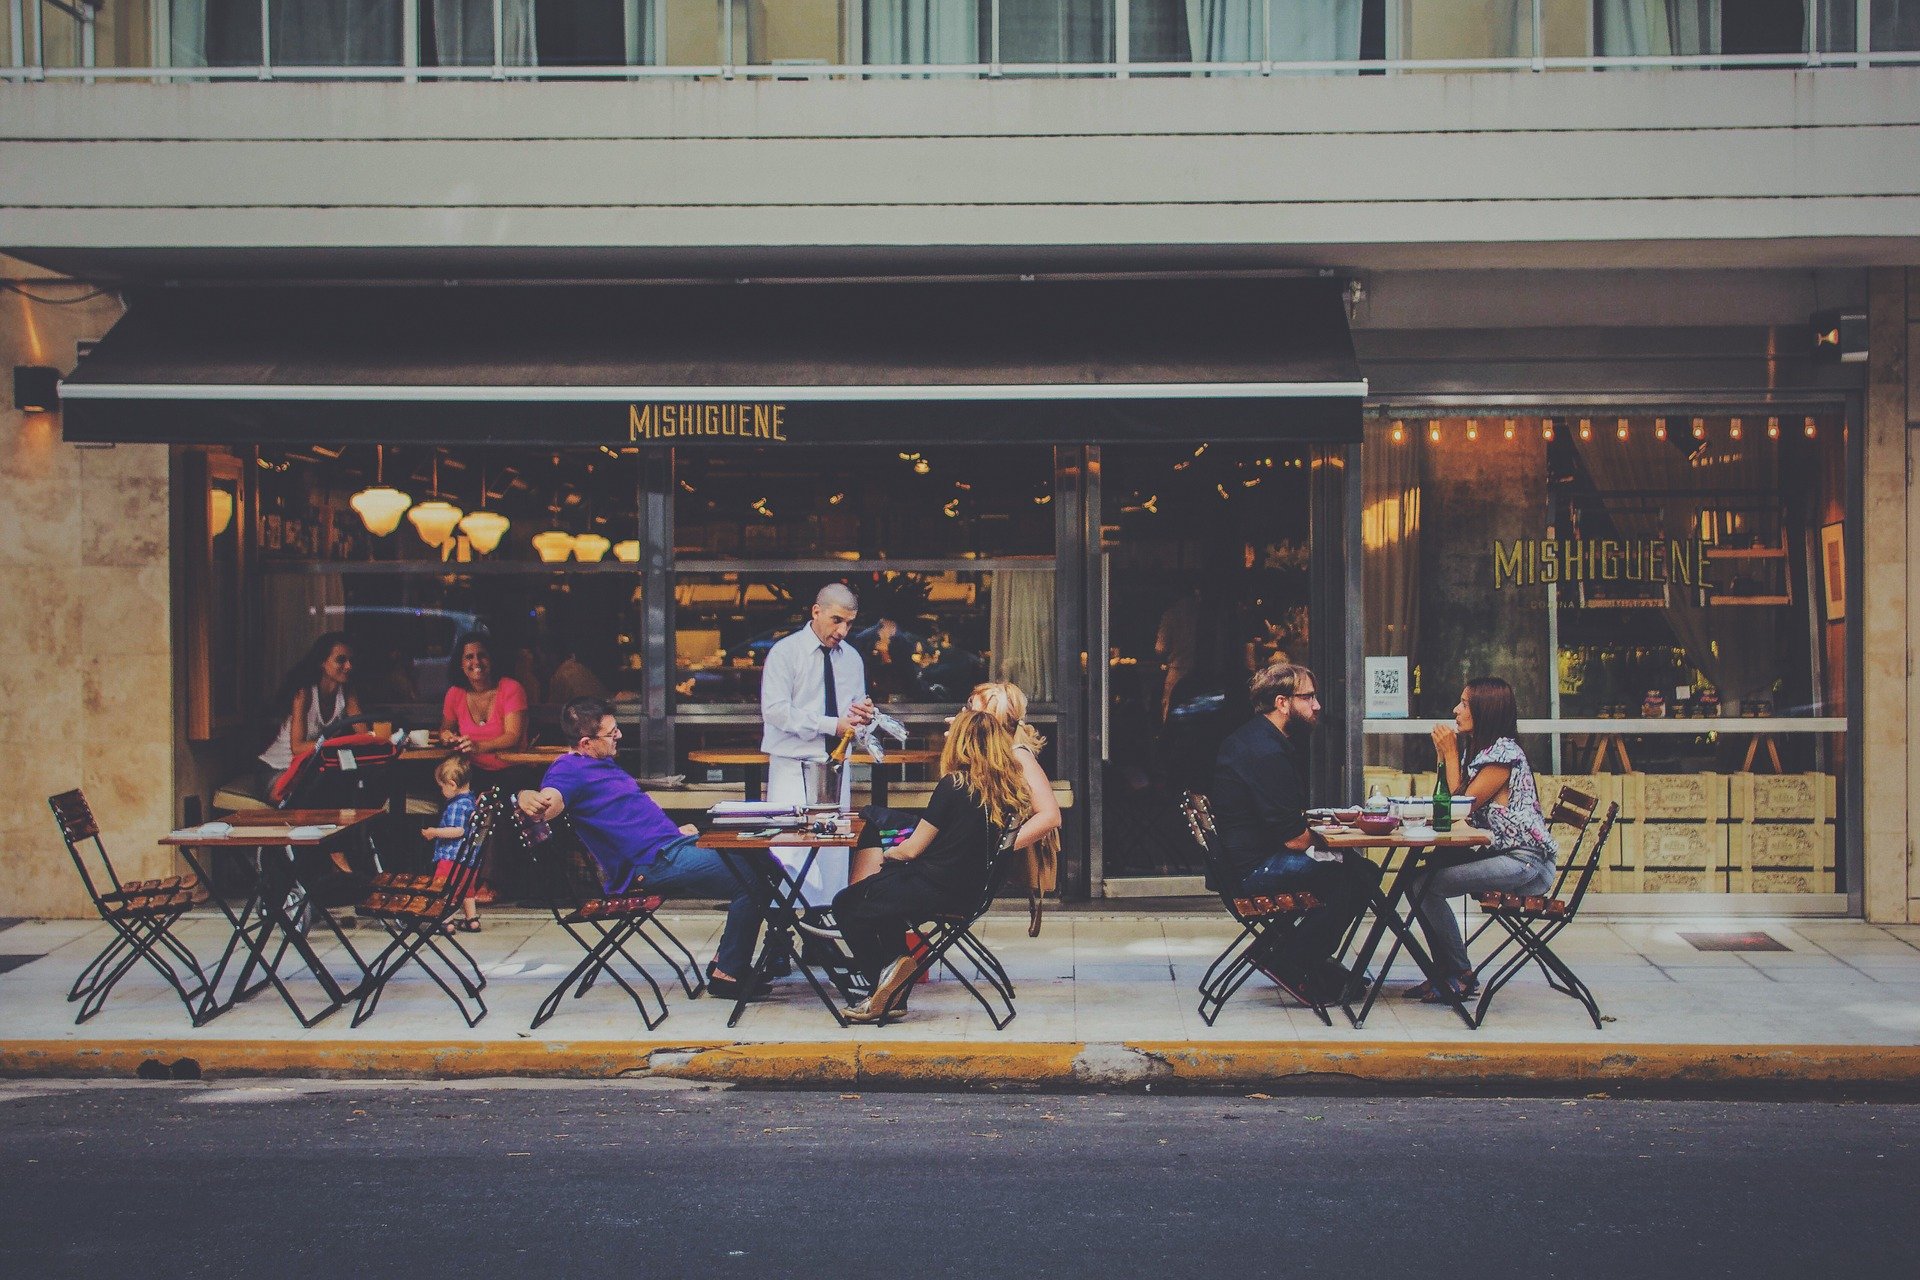 A group of people sitting and discussing outside a cafe